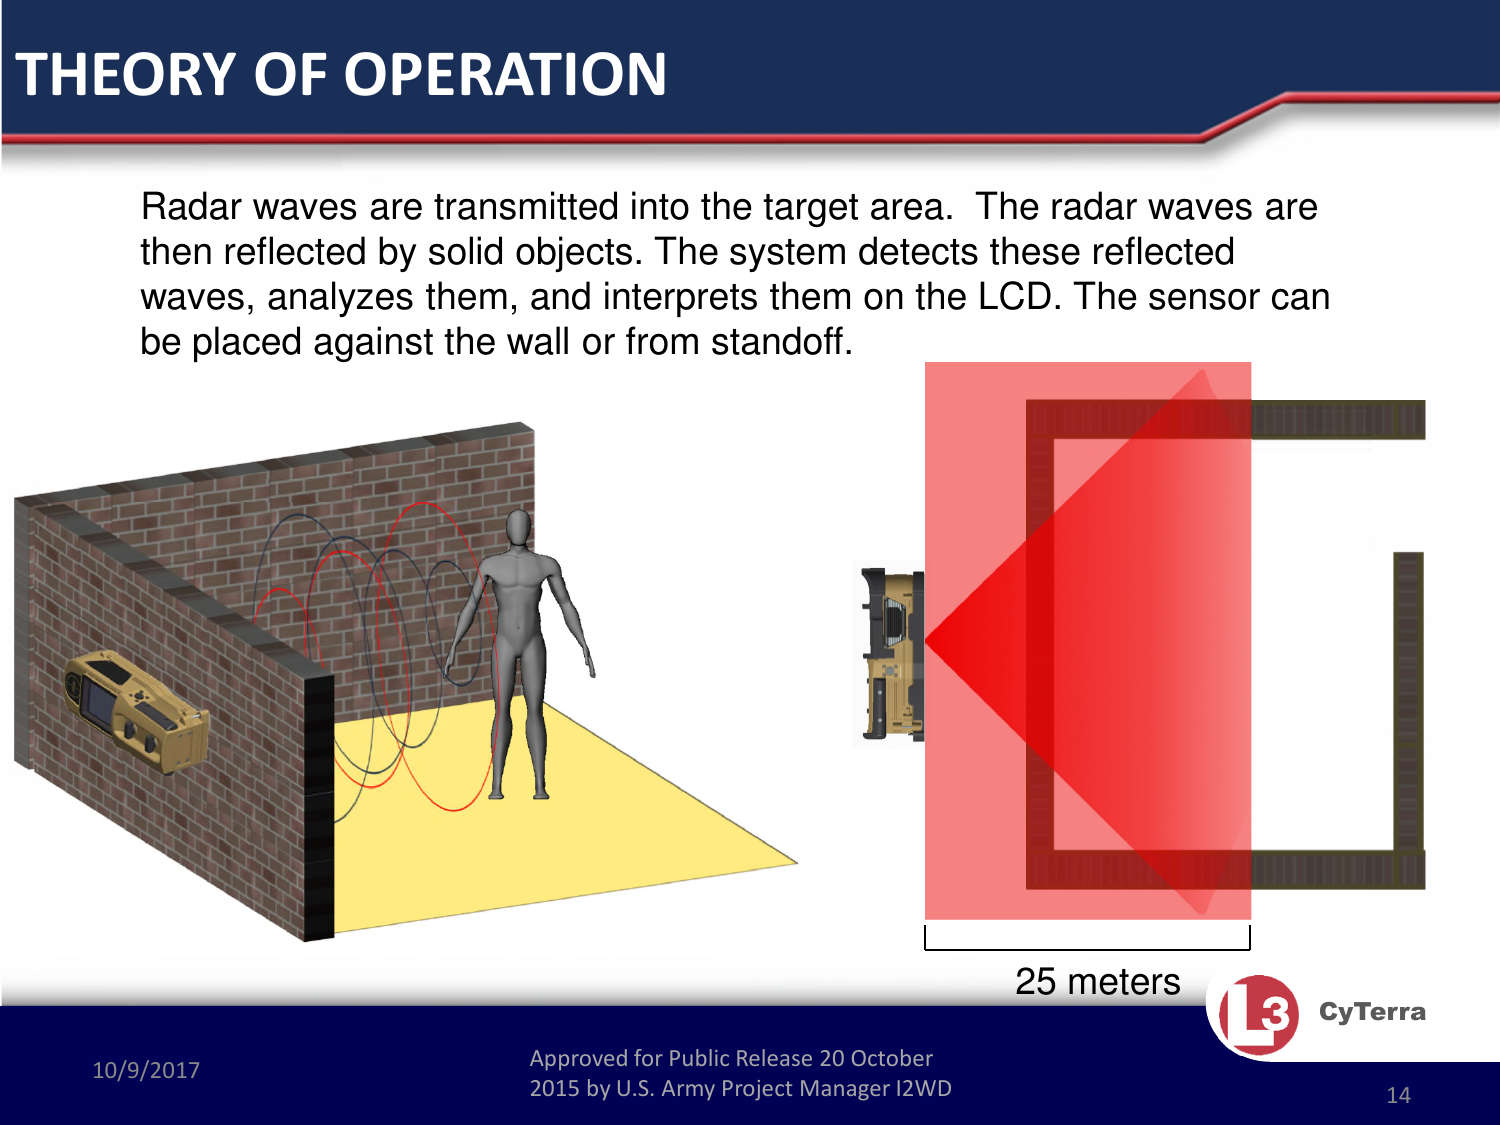 Approved for Public Release 20 October 2015 by U.S. Army Project Manager I2WD10/9/2017 Approved for Public Release 20 October 2015 by U.S. Army Project Manager I2WD 14CyTerraRadar waves are transmitted into the target area.  The radar waves are then reflected by solid objects. The system detects these reflected waves, analyzes them, and interprets them on the LCD. The sensor can be placed against the wall or from standoff.THEORY OF OPERATION25 meters